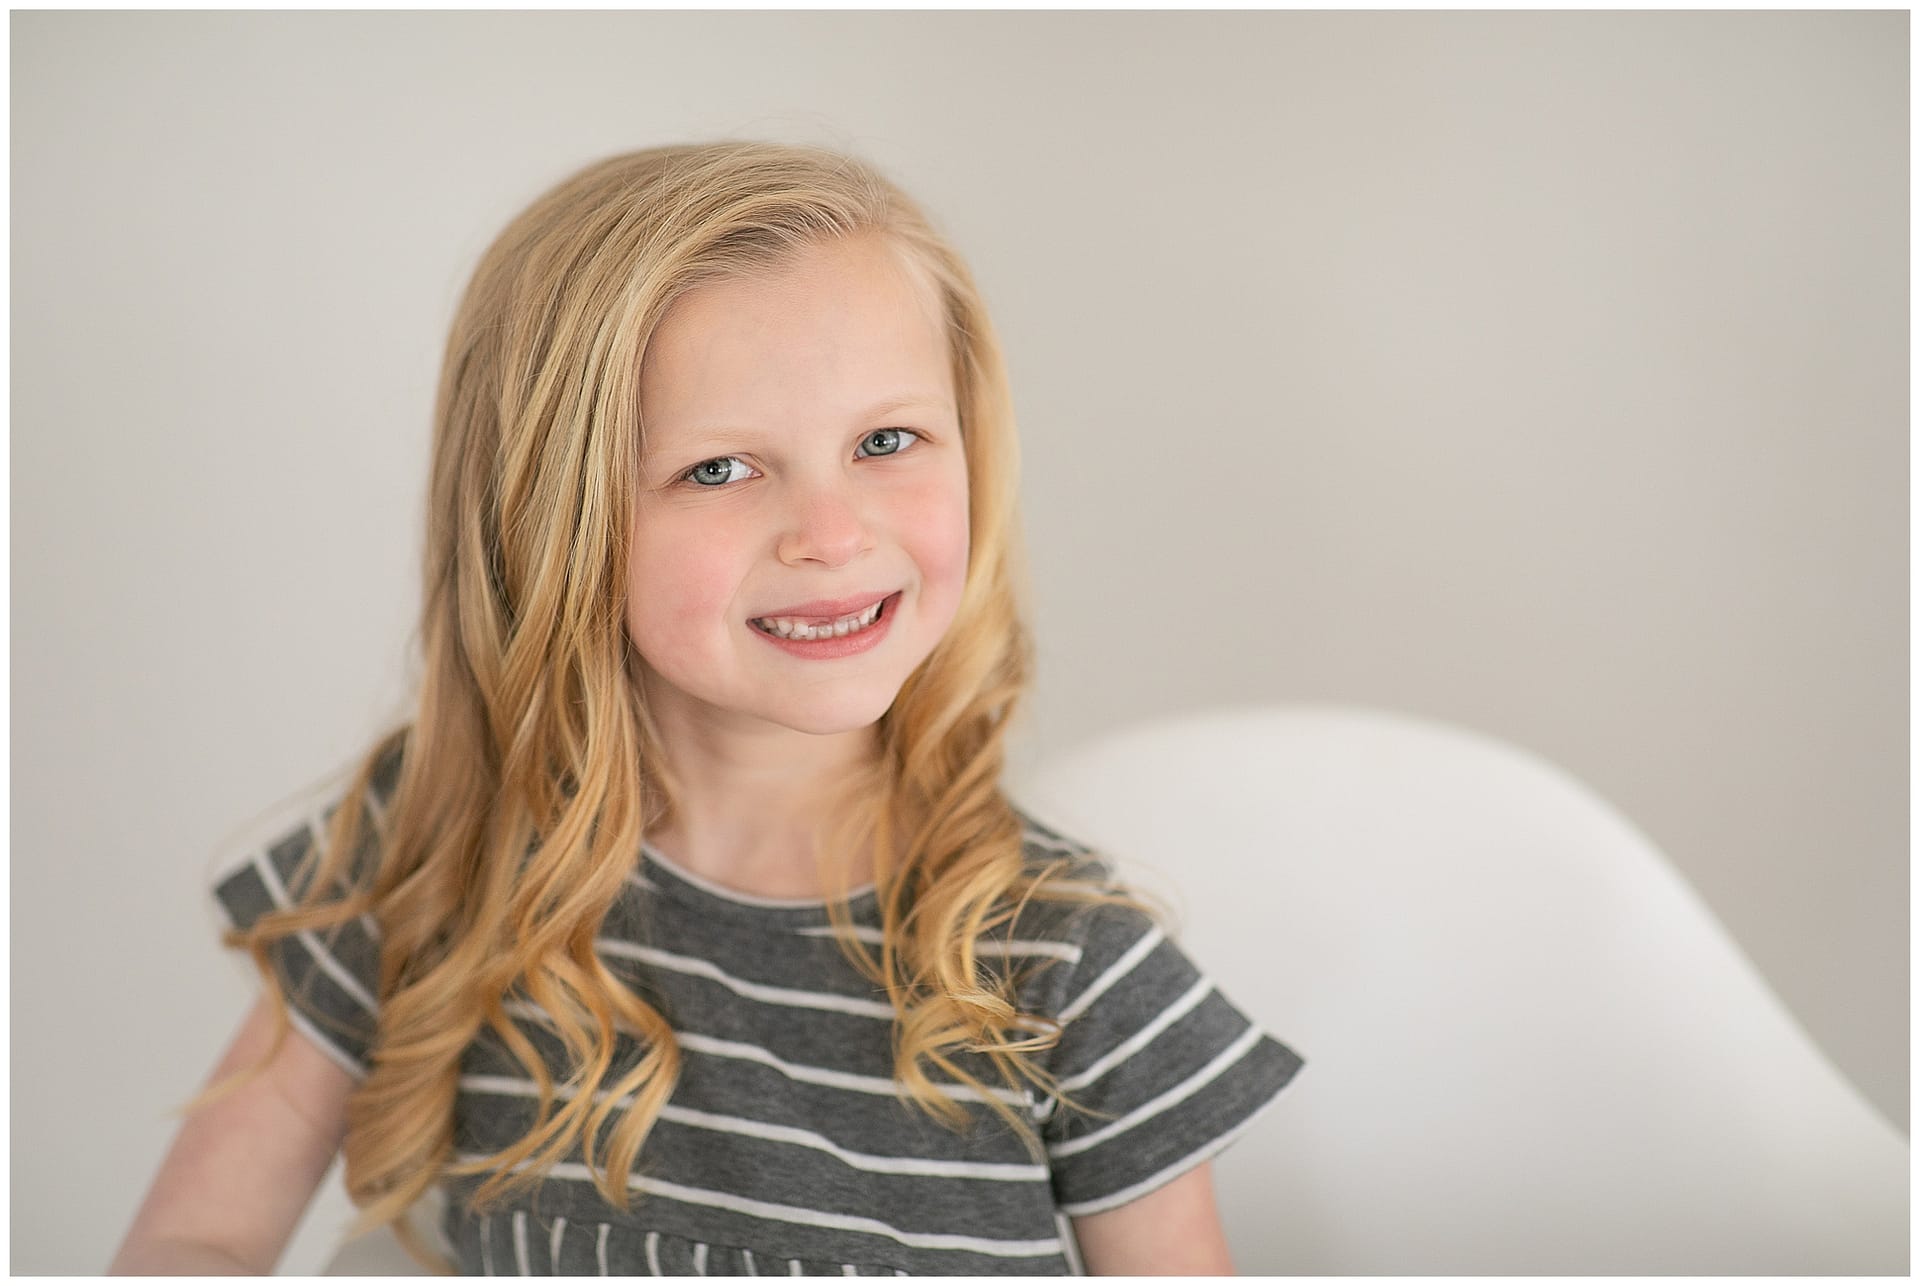 Child smiles for studio session portrait. Photos by Tiffany Hix Photography.